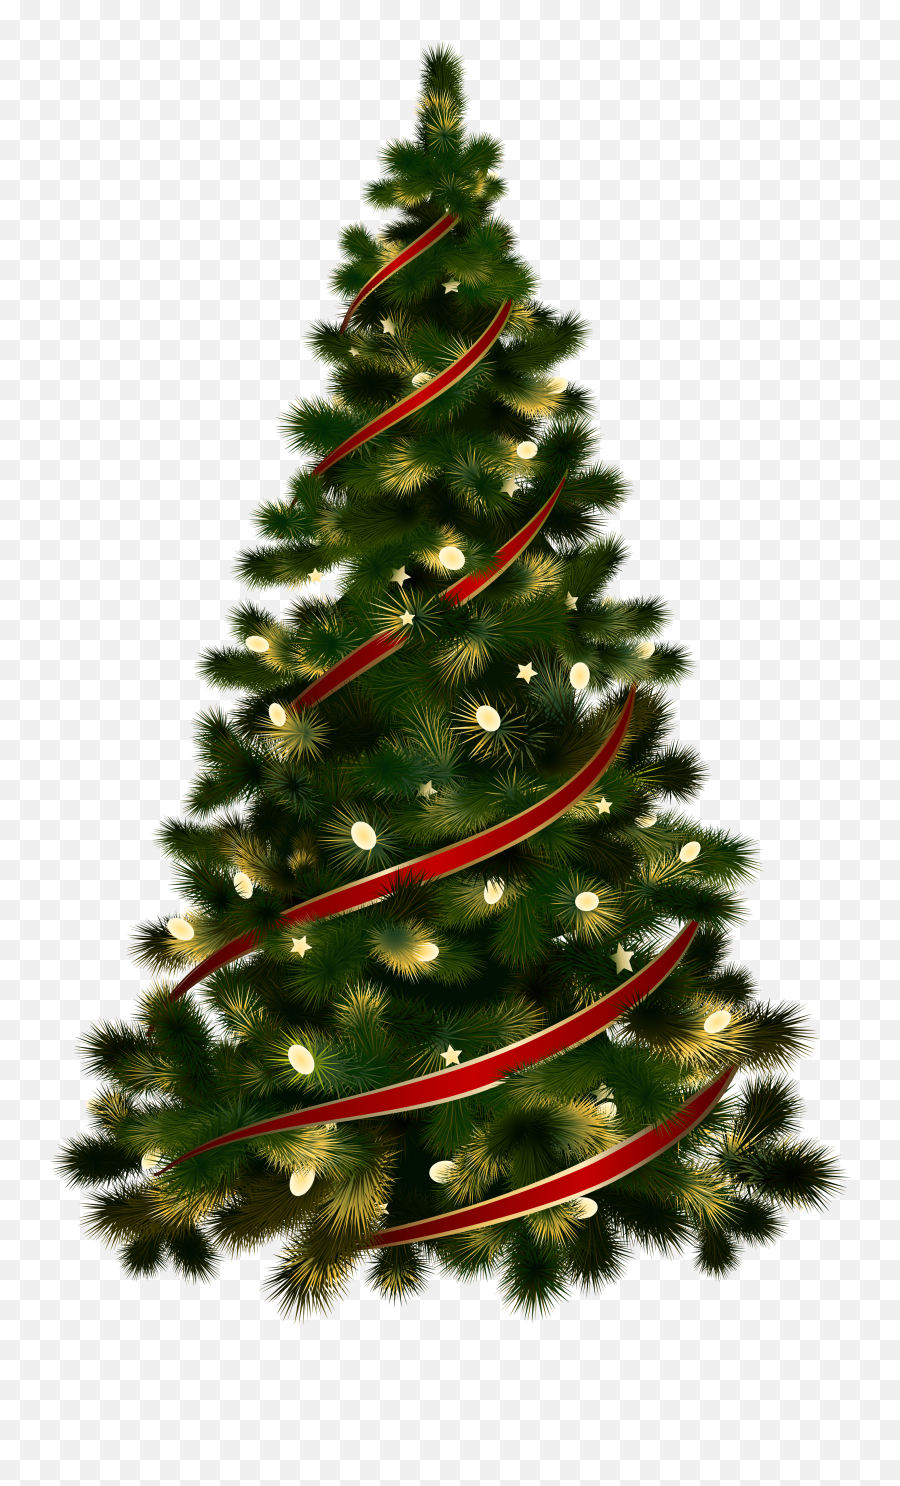 Download Hd Christmas Tree Png - Christmas Tree With,Christmas Backgrounds Png